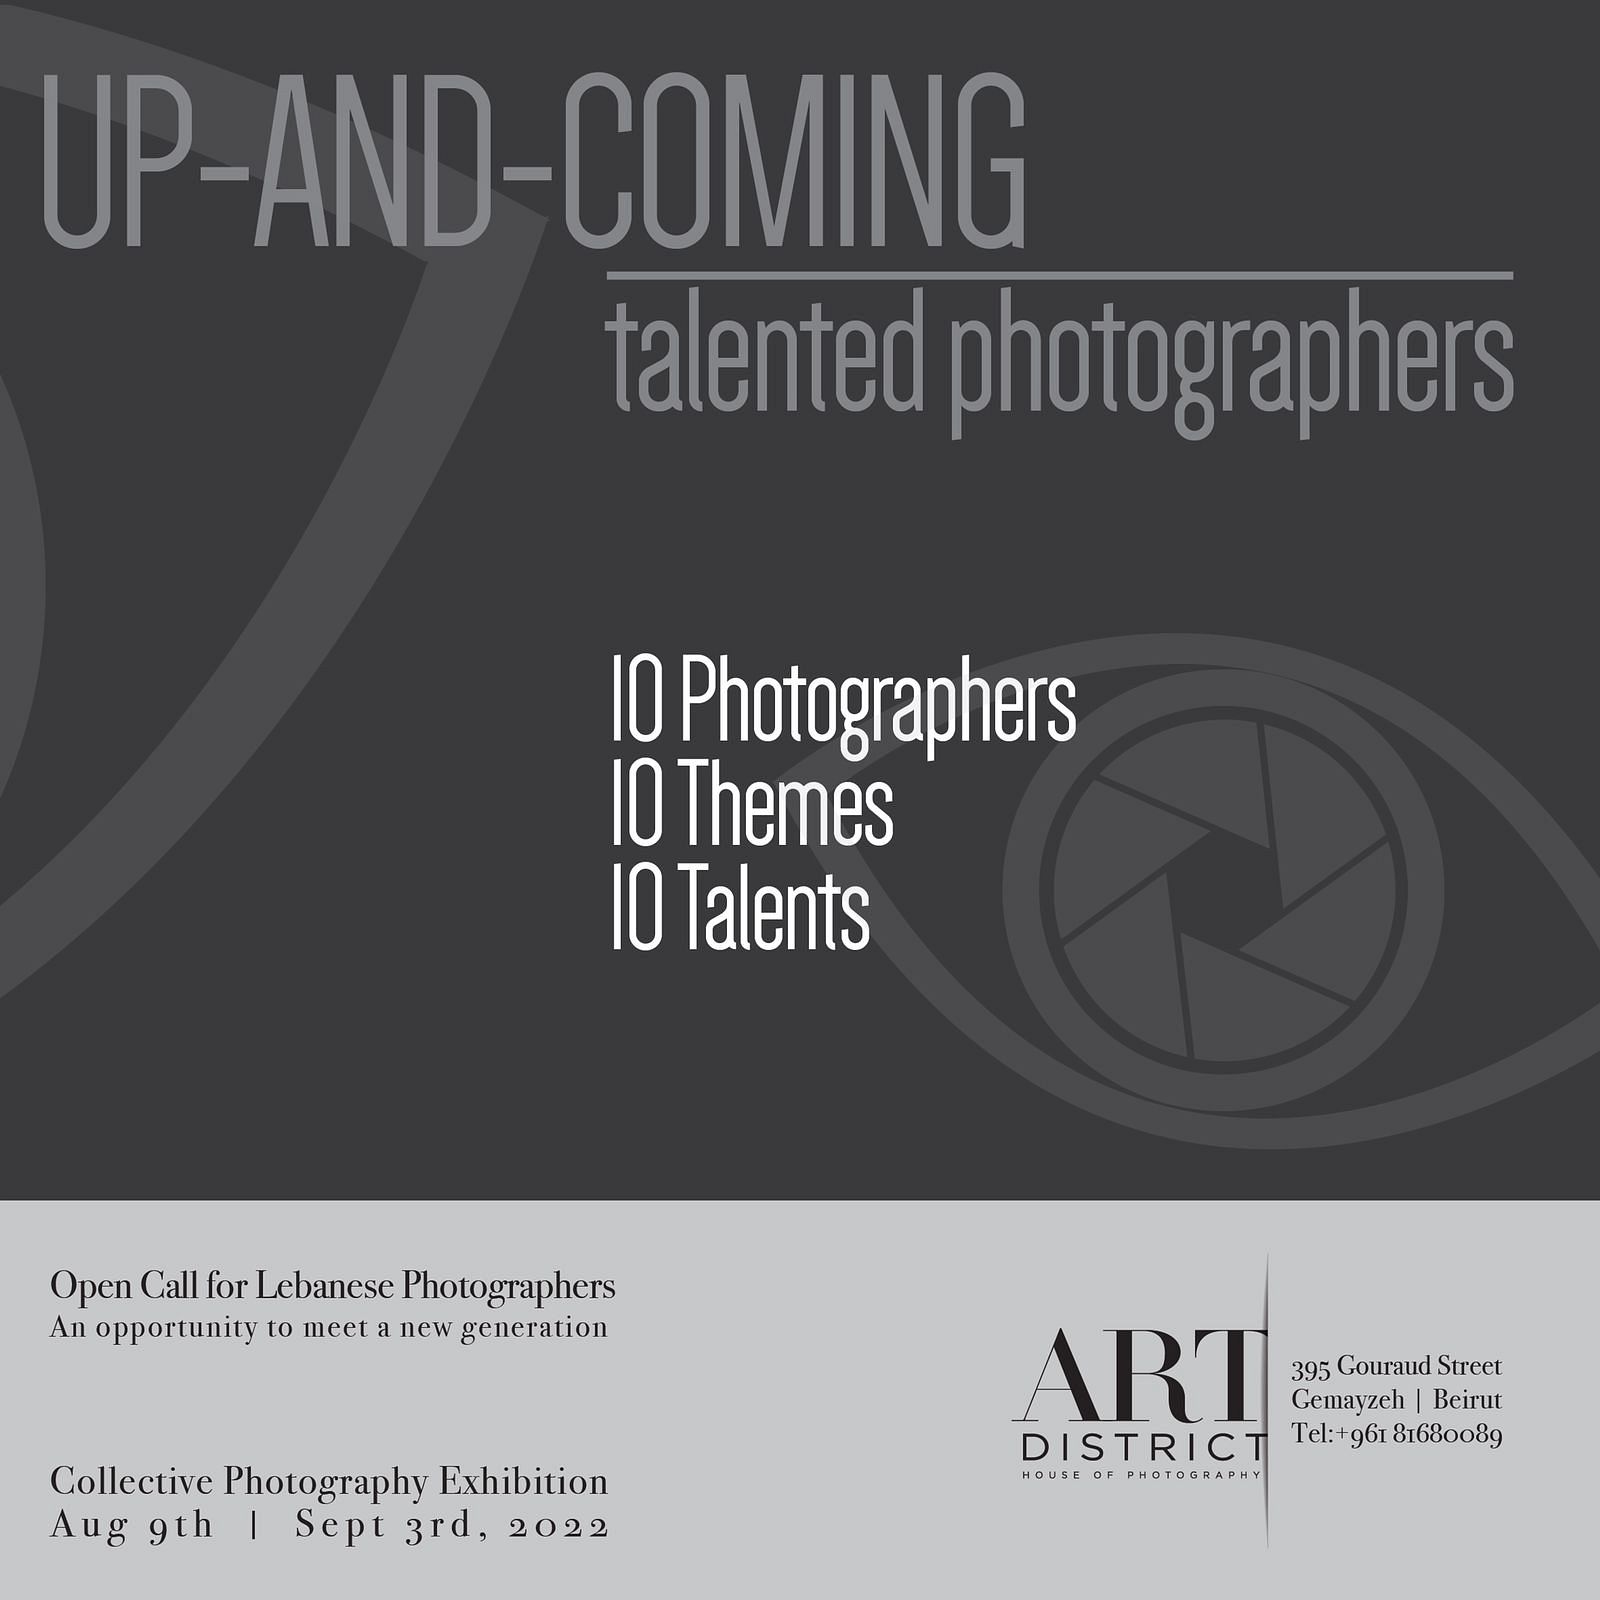 UP-AND-COMING TALENTED PHOTOGRAPHERS thumbnail